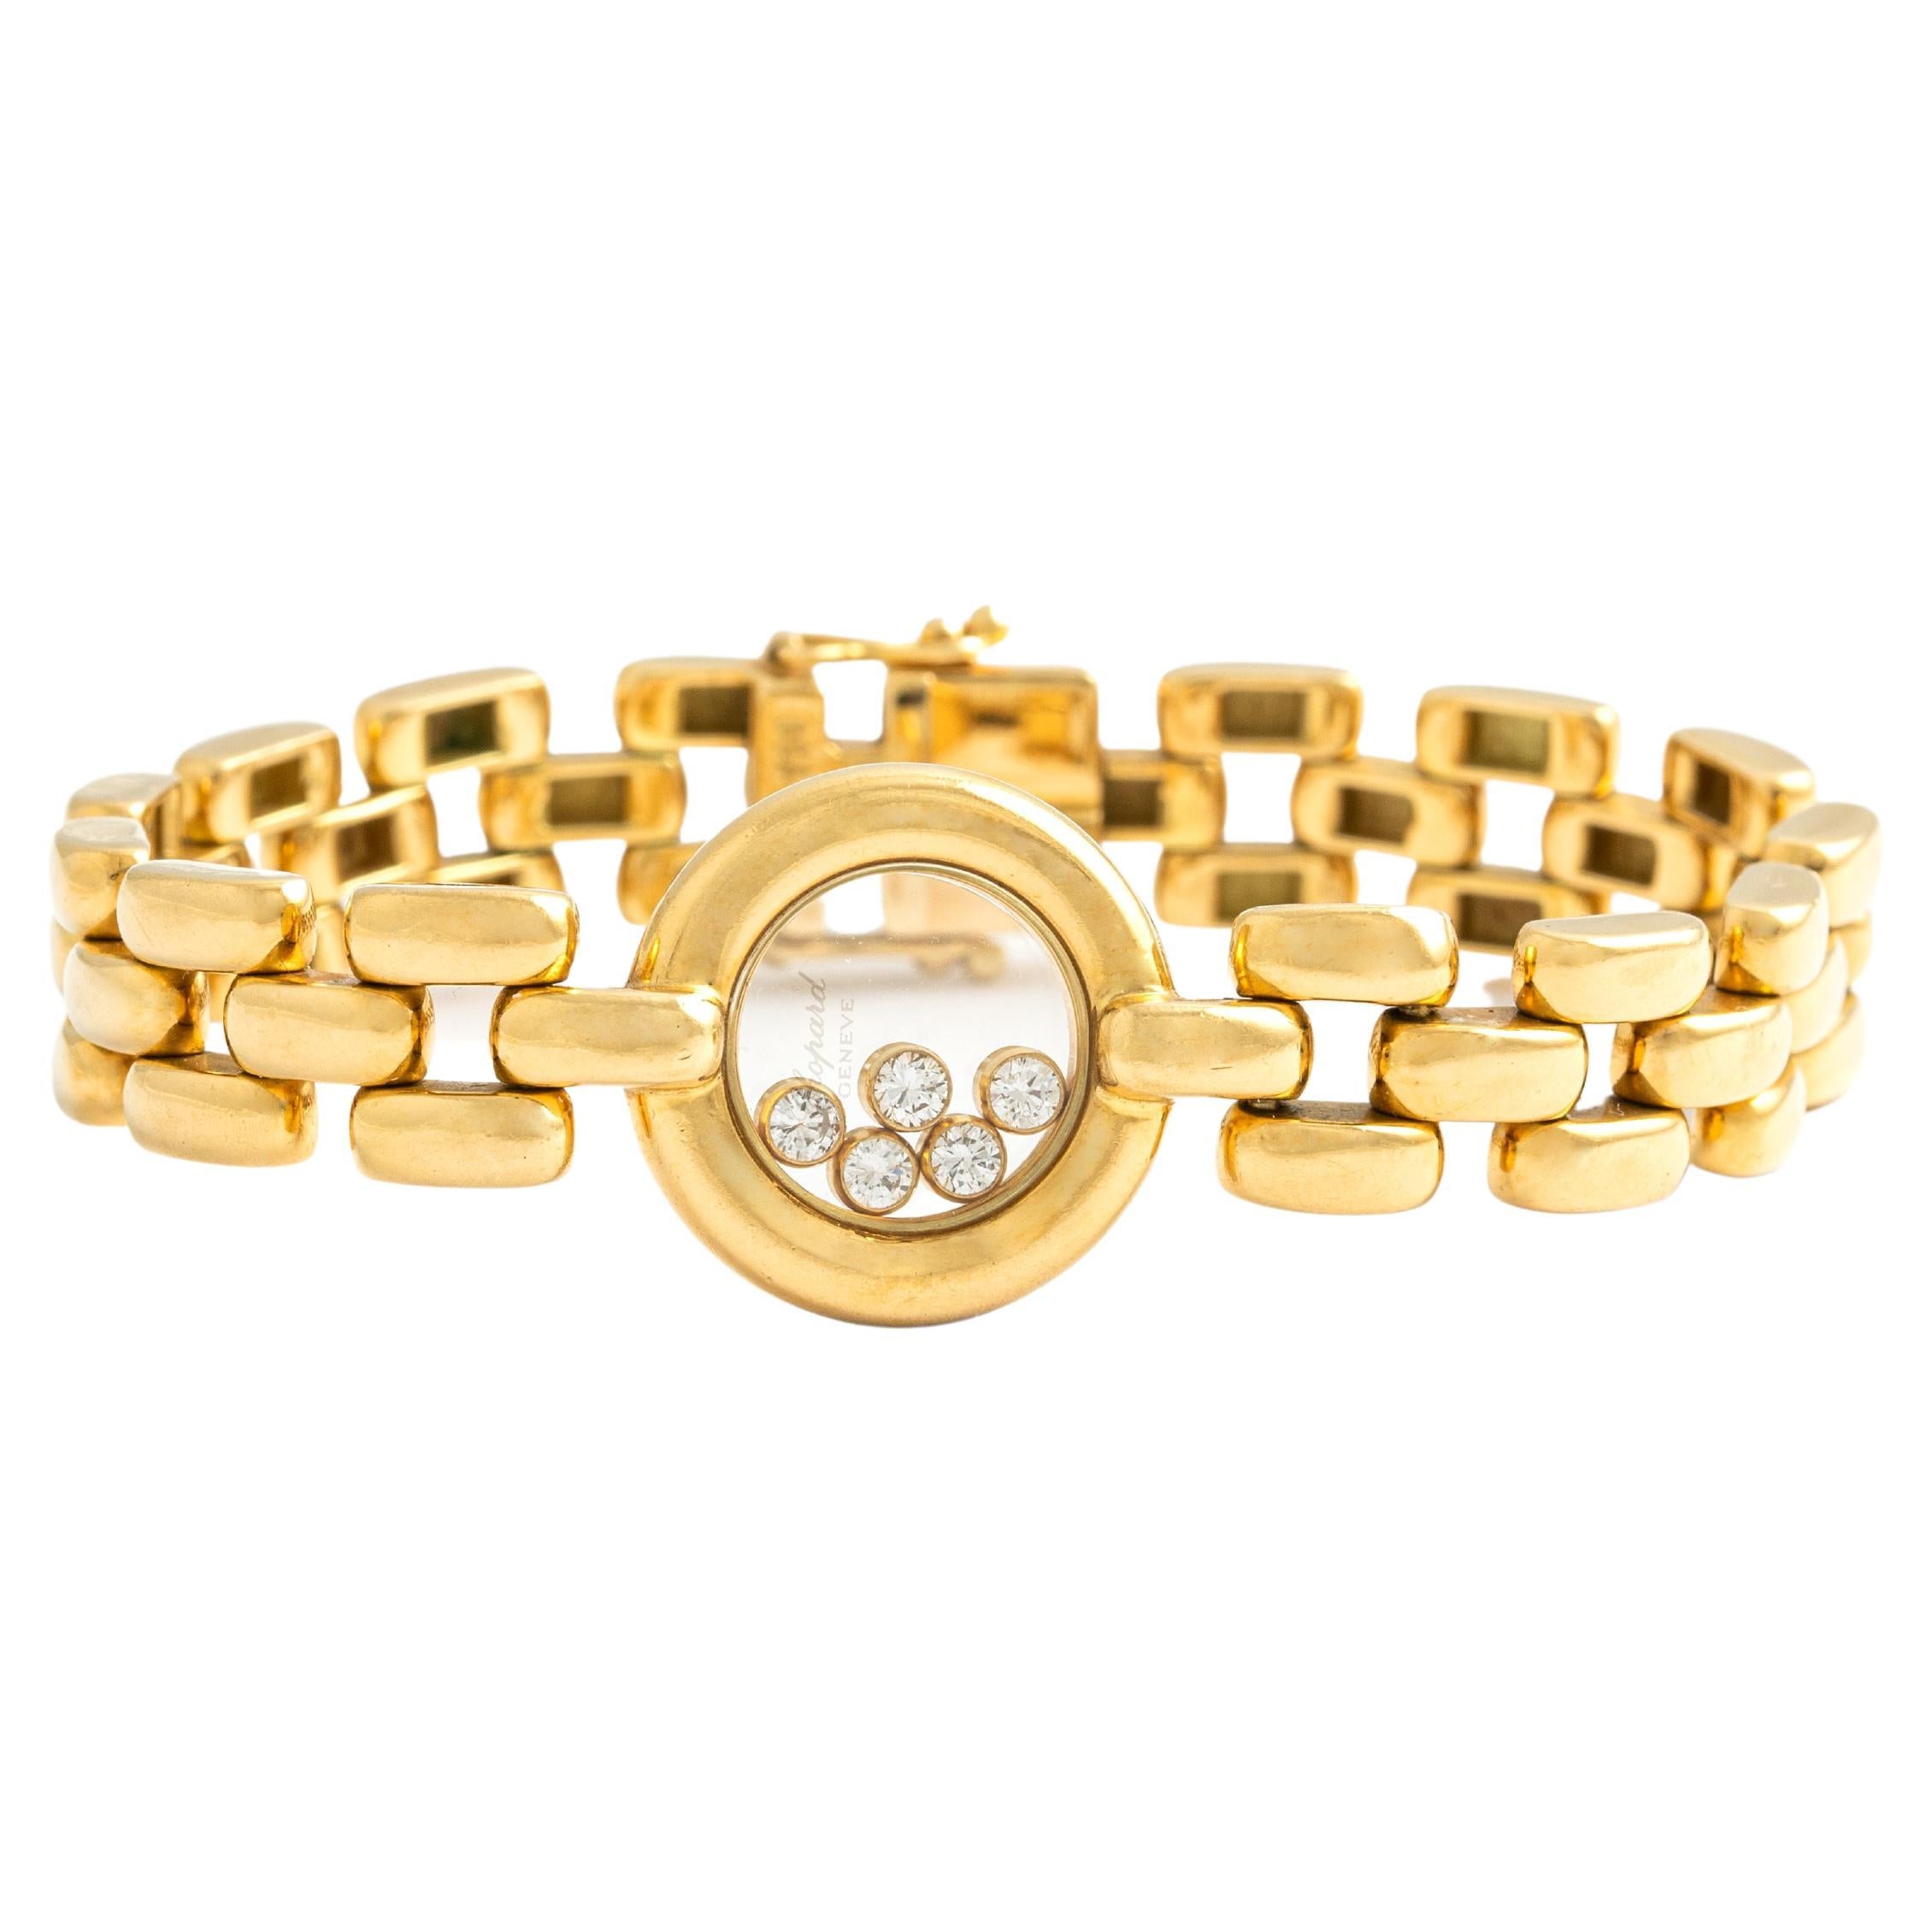 Chopard Happy Diamond yellow gold 18K Bracelet.
Signed Chopard.
We estimate in our opinion approximately 0.50 carat total diamond weight. Quality H color and Vs clarity.
Length: 15.00 centimeters.
Width: 0.90 centimeter.
Round screen diameter: 1.20